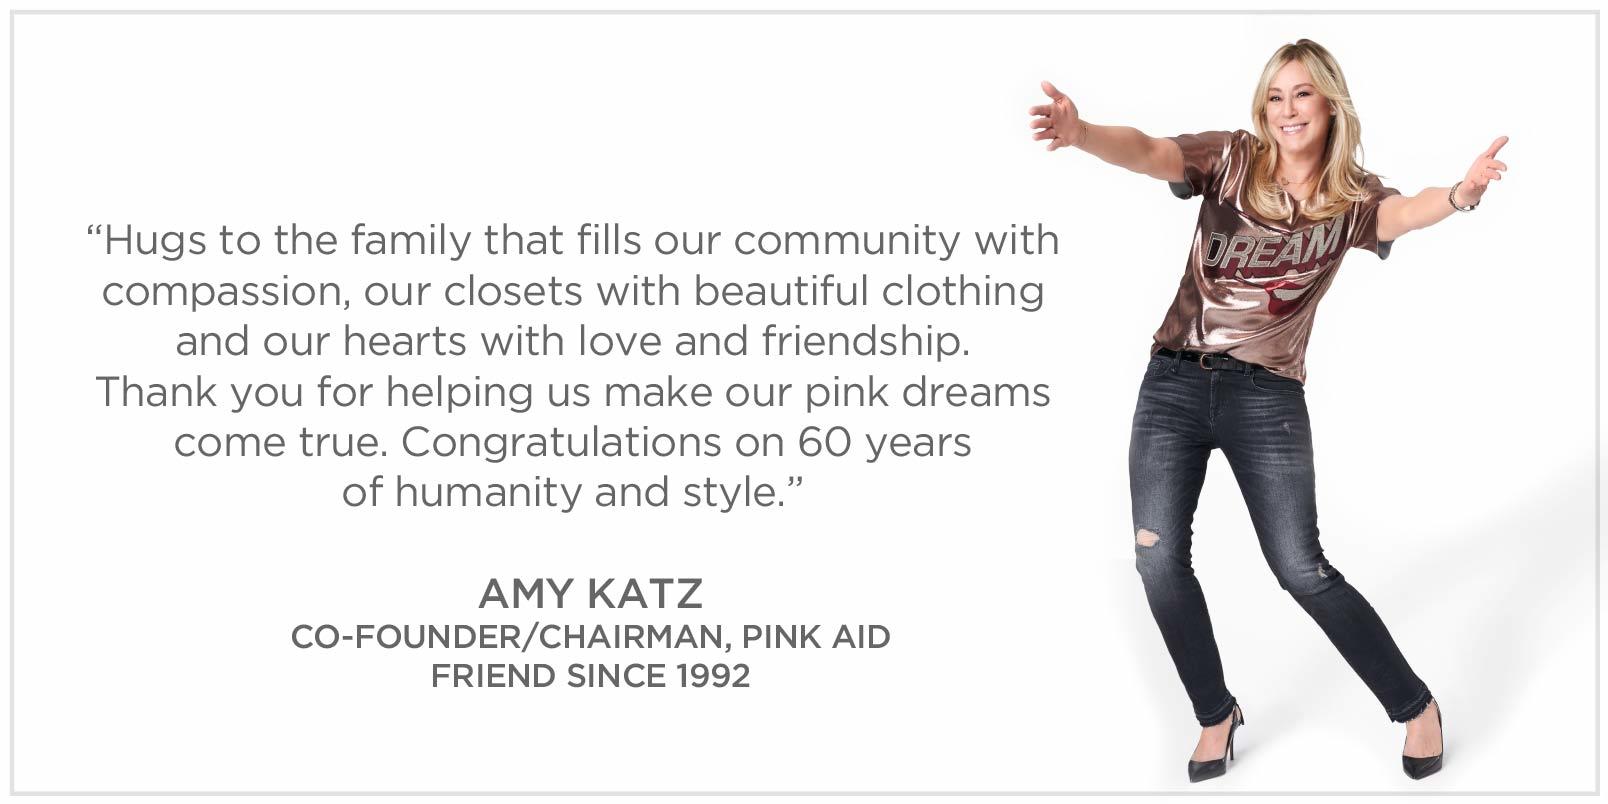 Hugs to the family that fills our community with compassion, our closets with beautiful clothing and our hearts with love and friendship. Thank you for helping us make our pink dreams come true. Congratulations on 60 yearsof humanity and style. Amy Katz